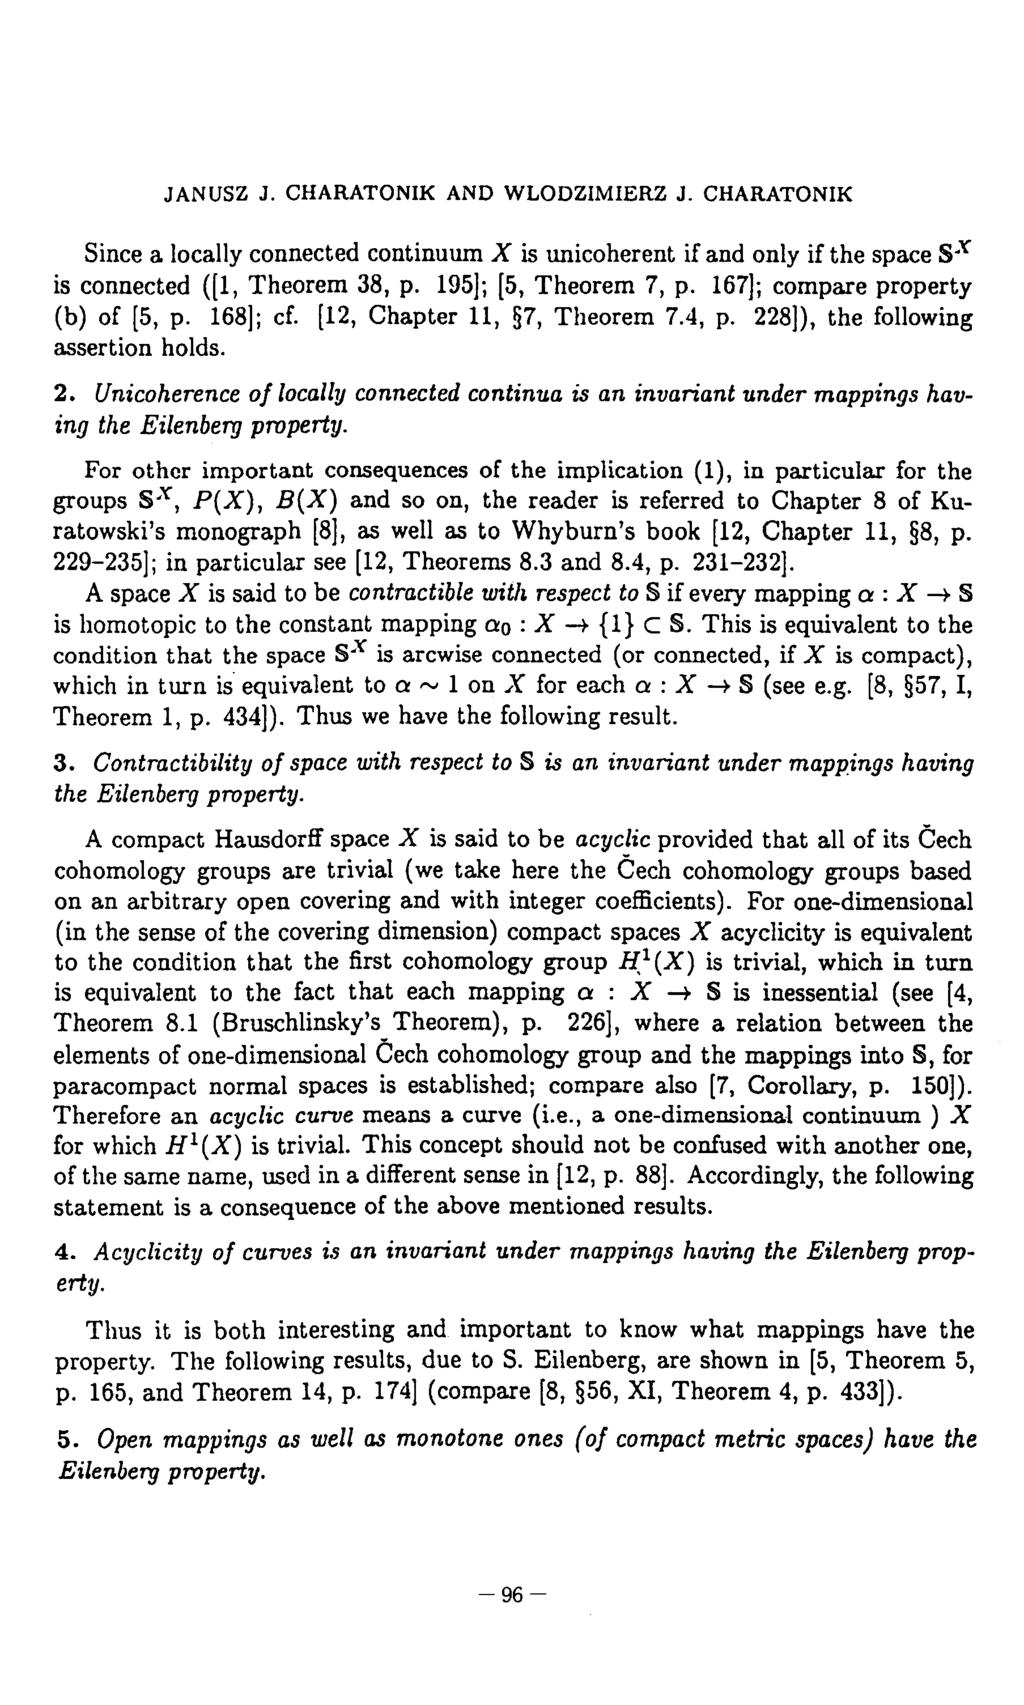 JANUSZ J. CHARATONIK AND WLODZIMIERZ J. CHARATONIK Since a locally connected continuum X is unicoherent if and only if the space SX is connected ([1, Theorem 38, p. 195]; [5, Theorem 7, p.